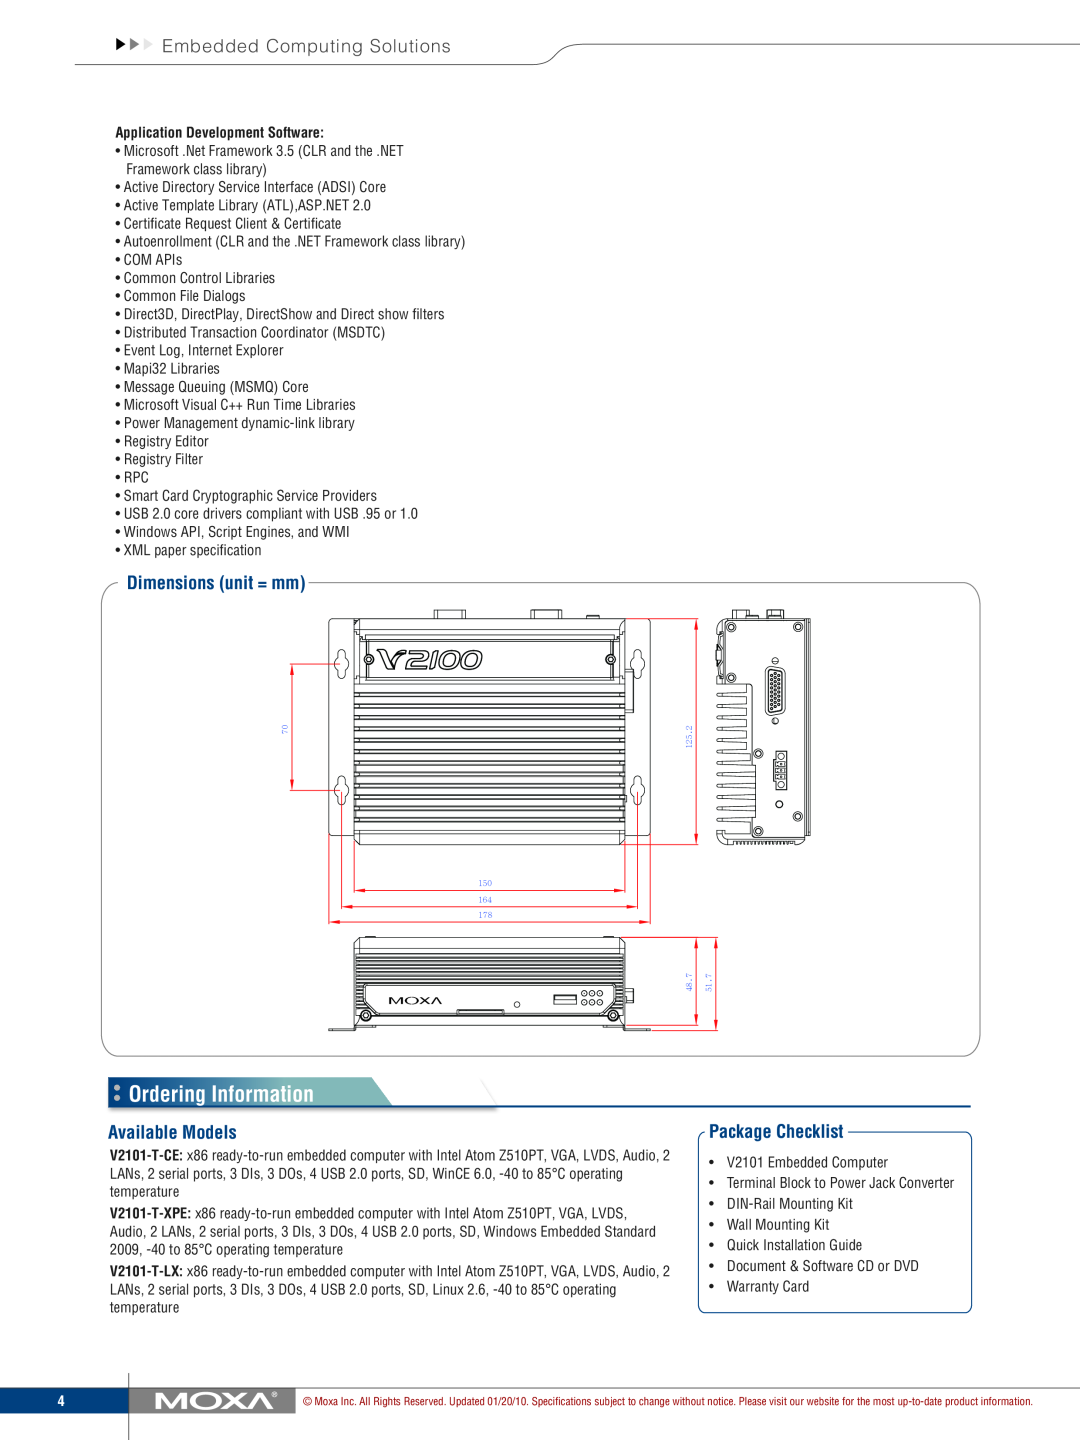 Moxa Technologies V2101 manual Ordering Information, Embedded Computing Solutions, Dimensions unit = mm, Available Models 